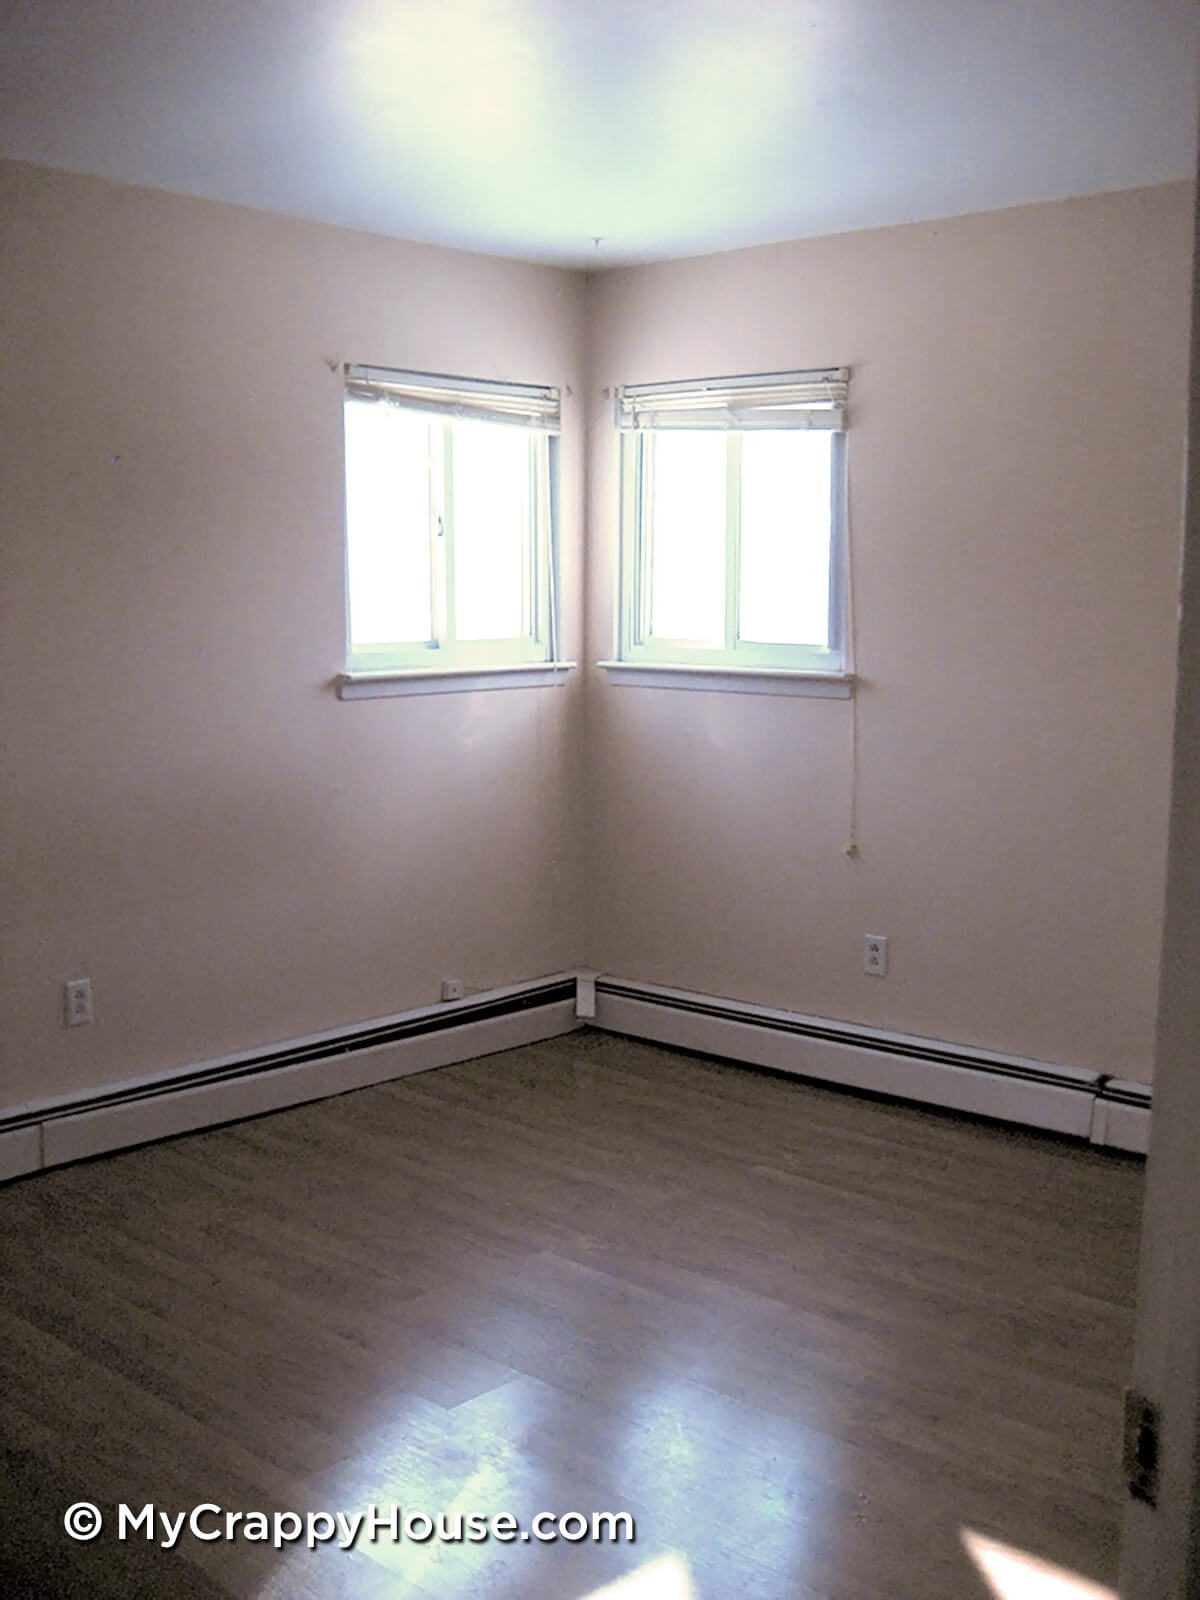 Empty room with peach walls and two windows in the corner